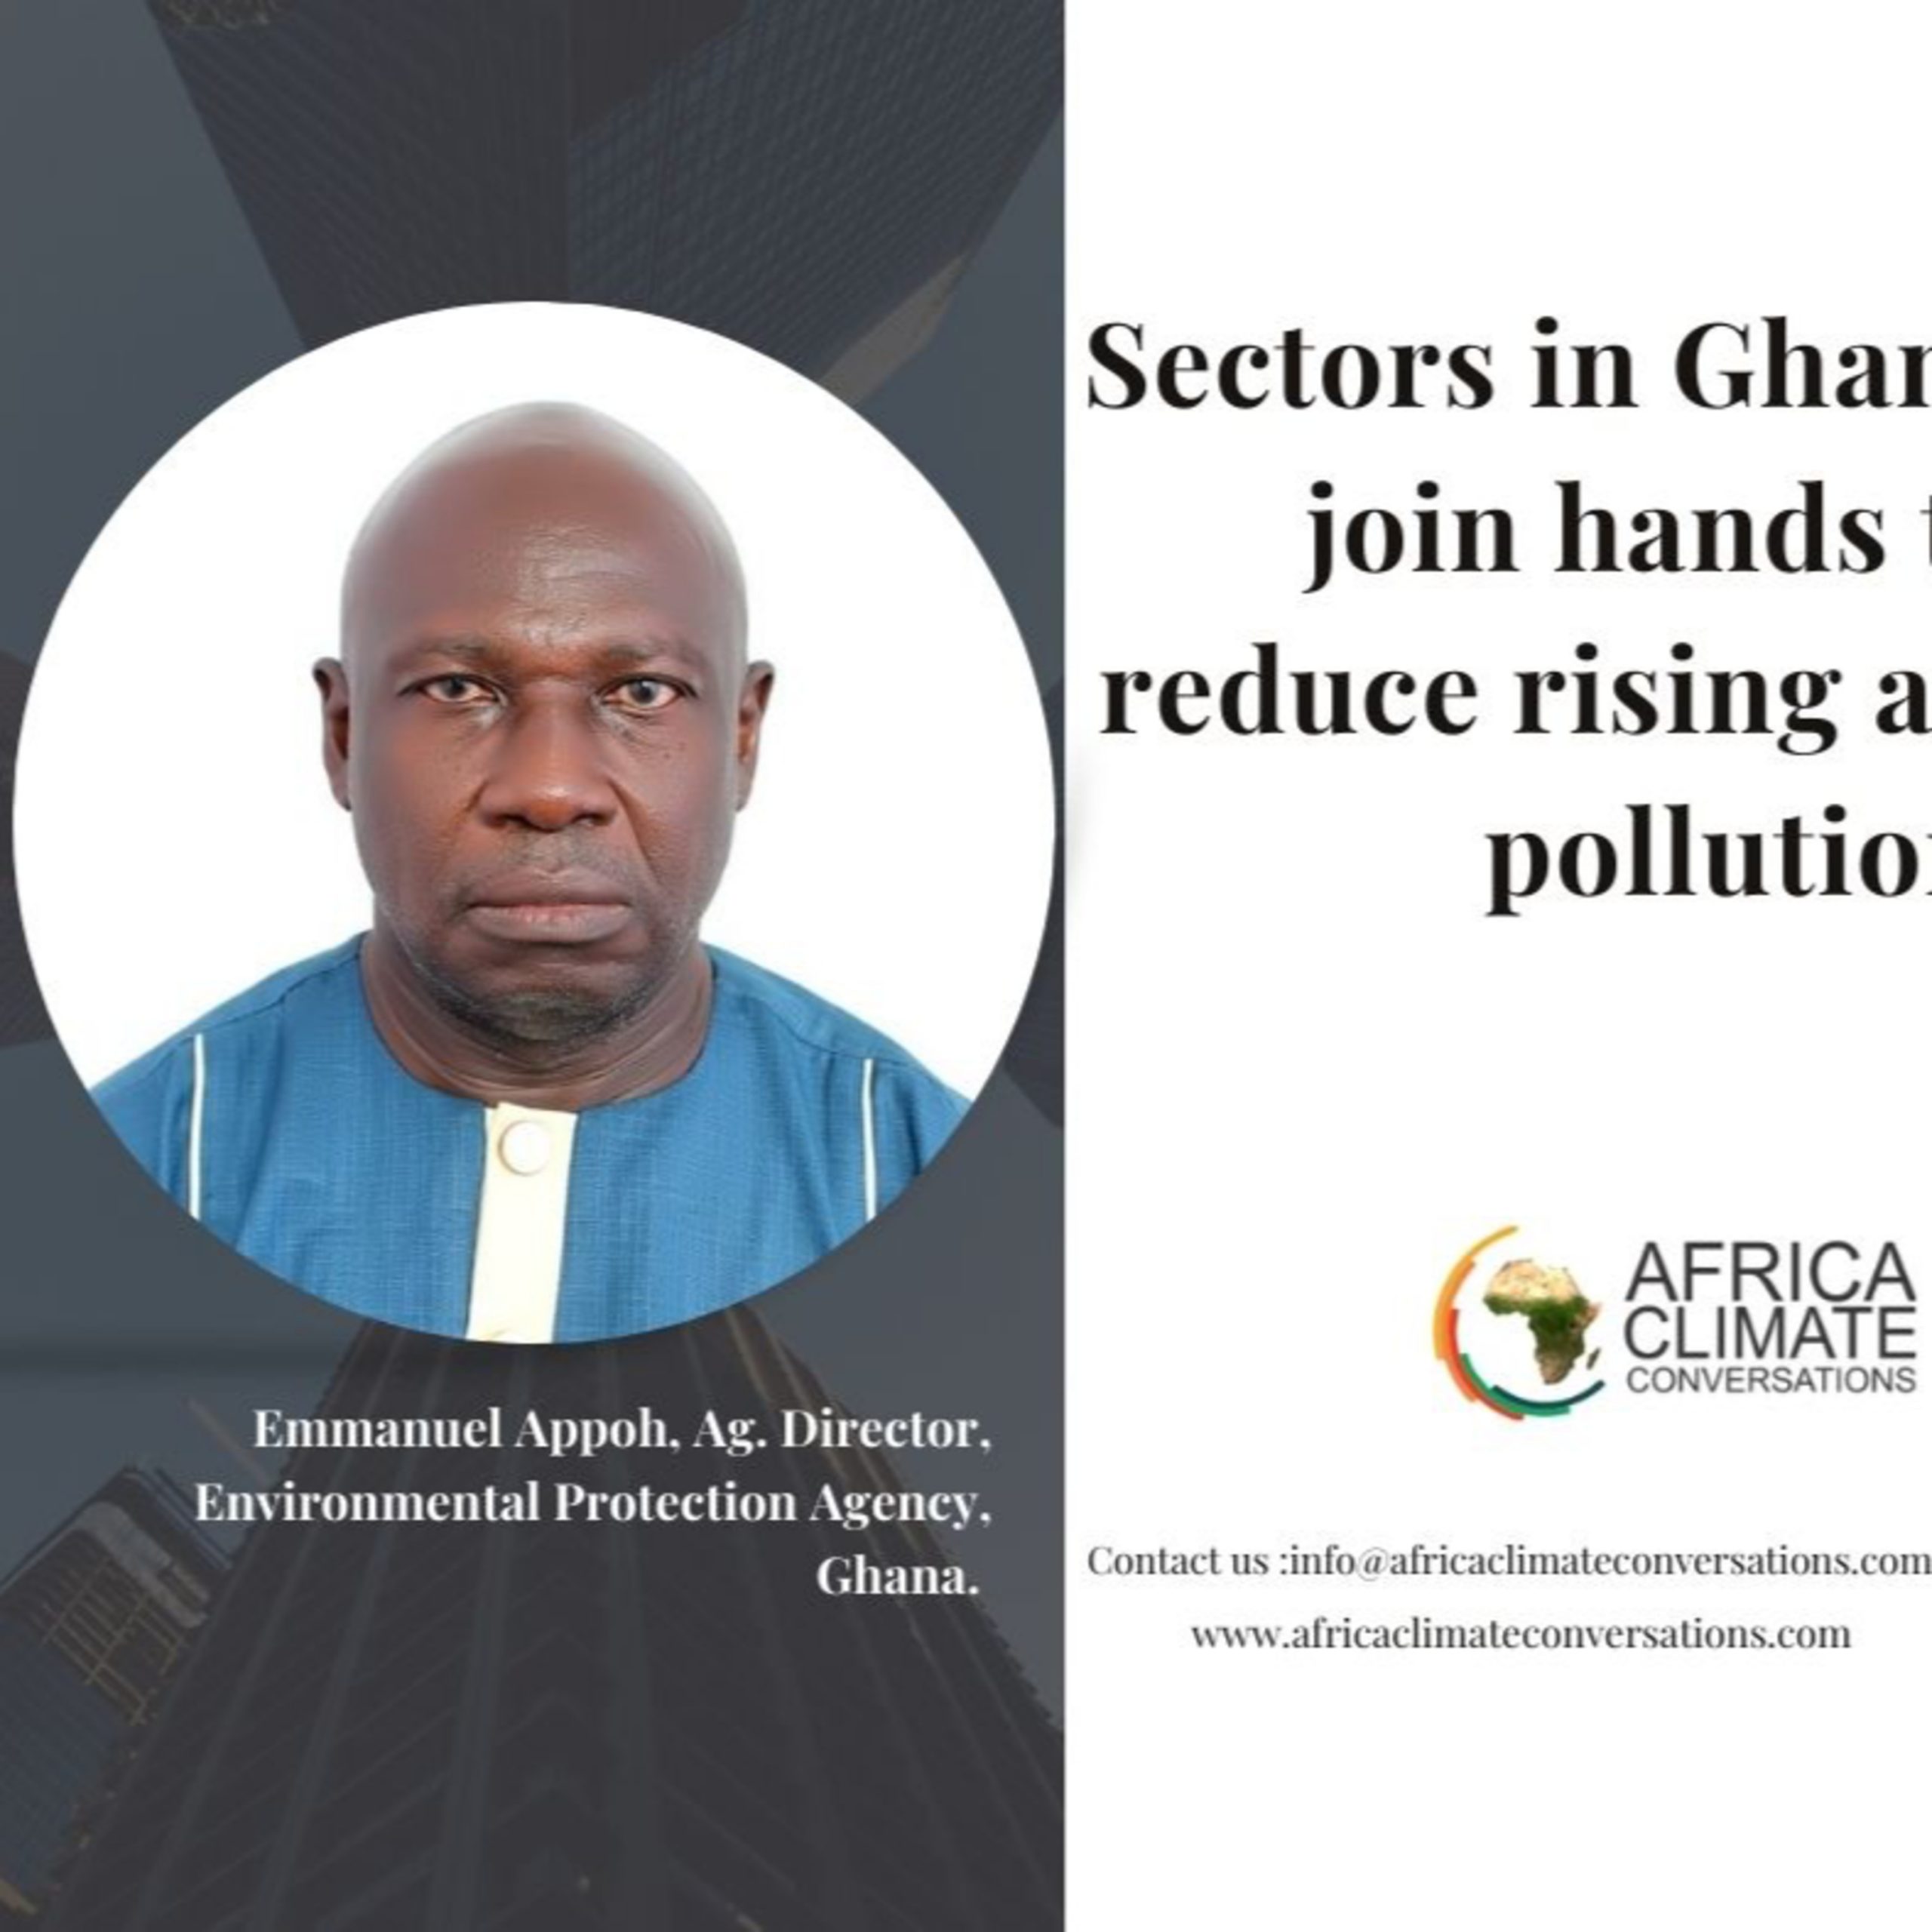 Sectors in Ghana join hands to reduce rising air pollution.